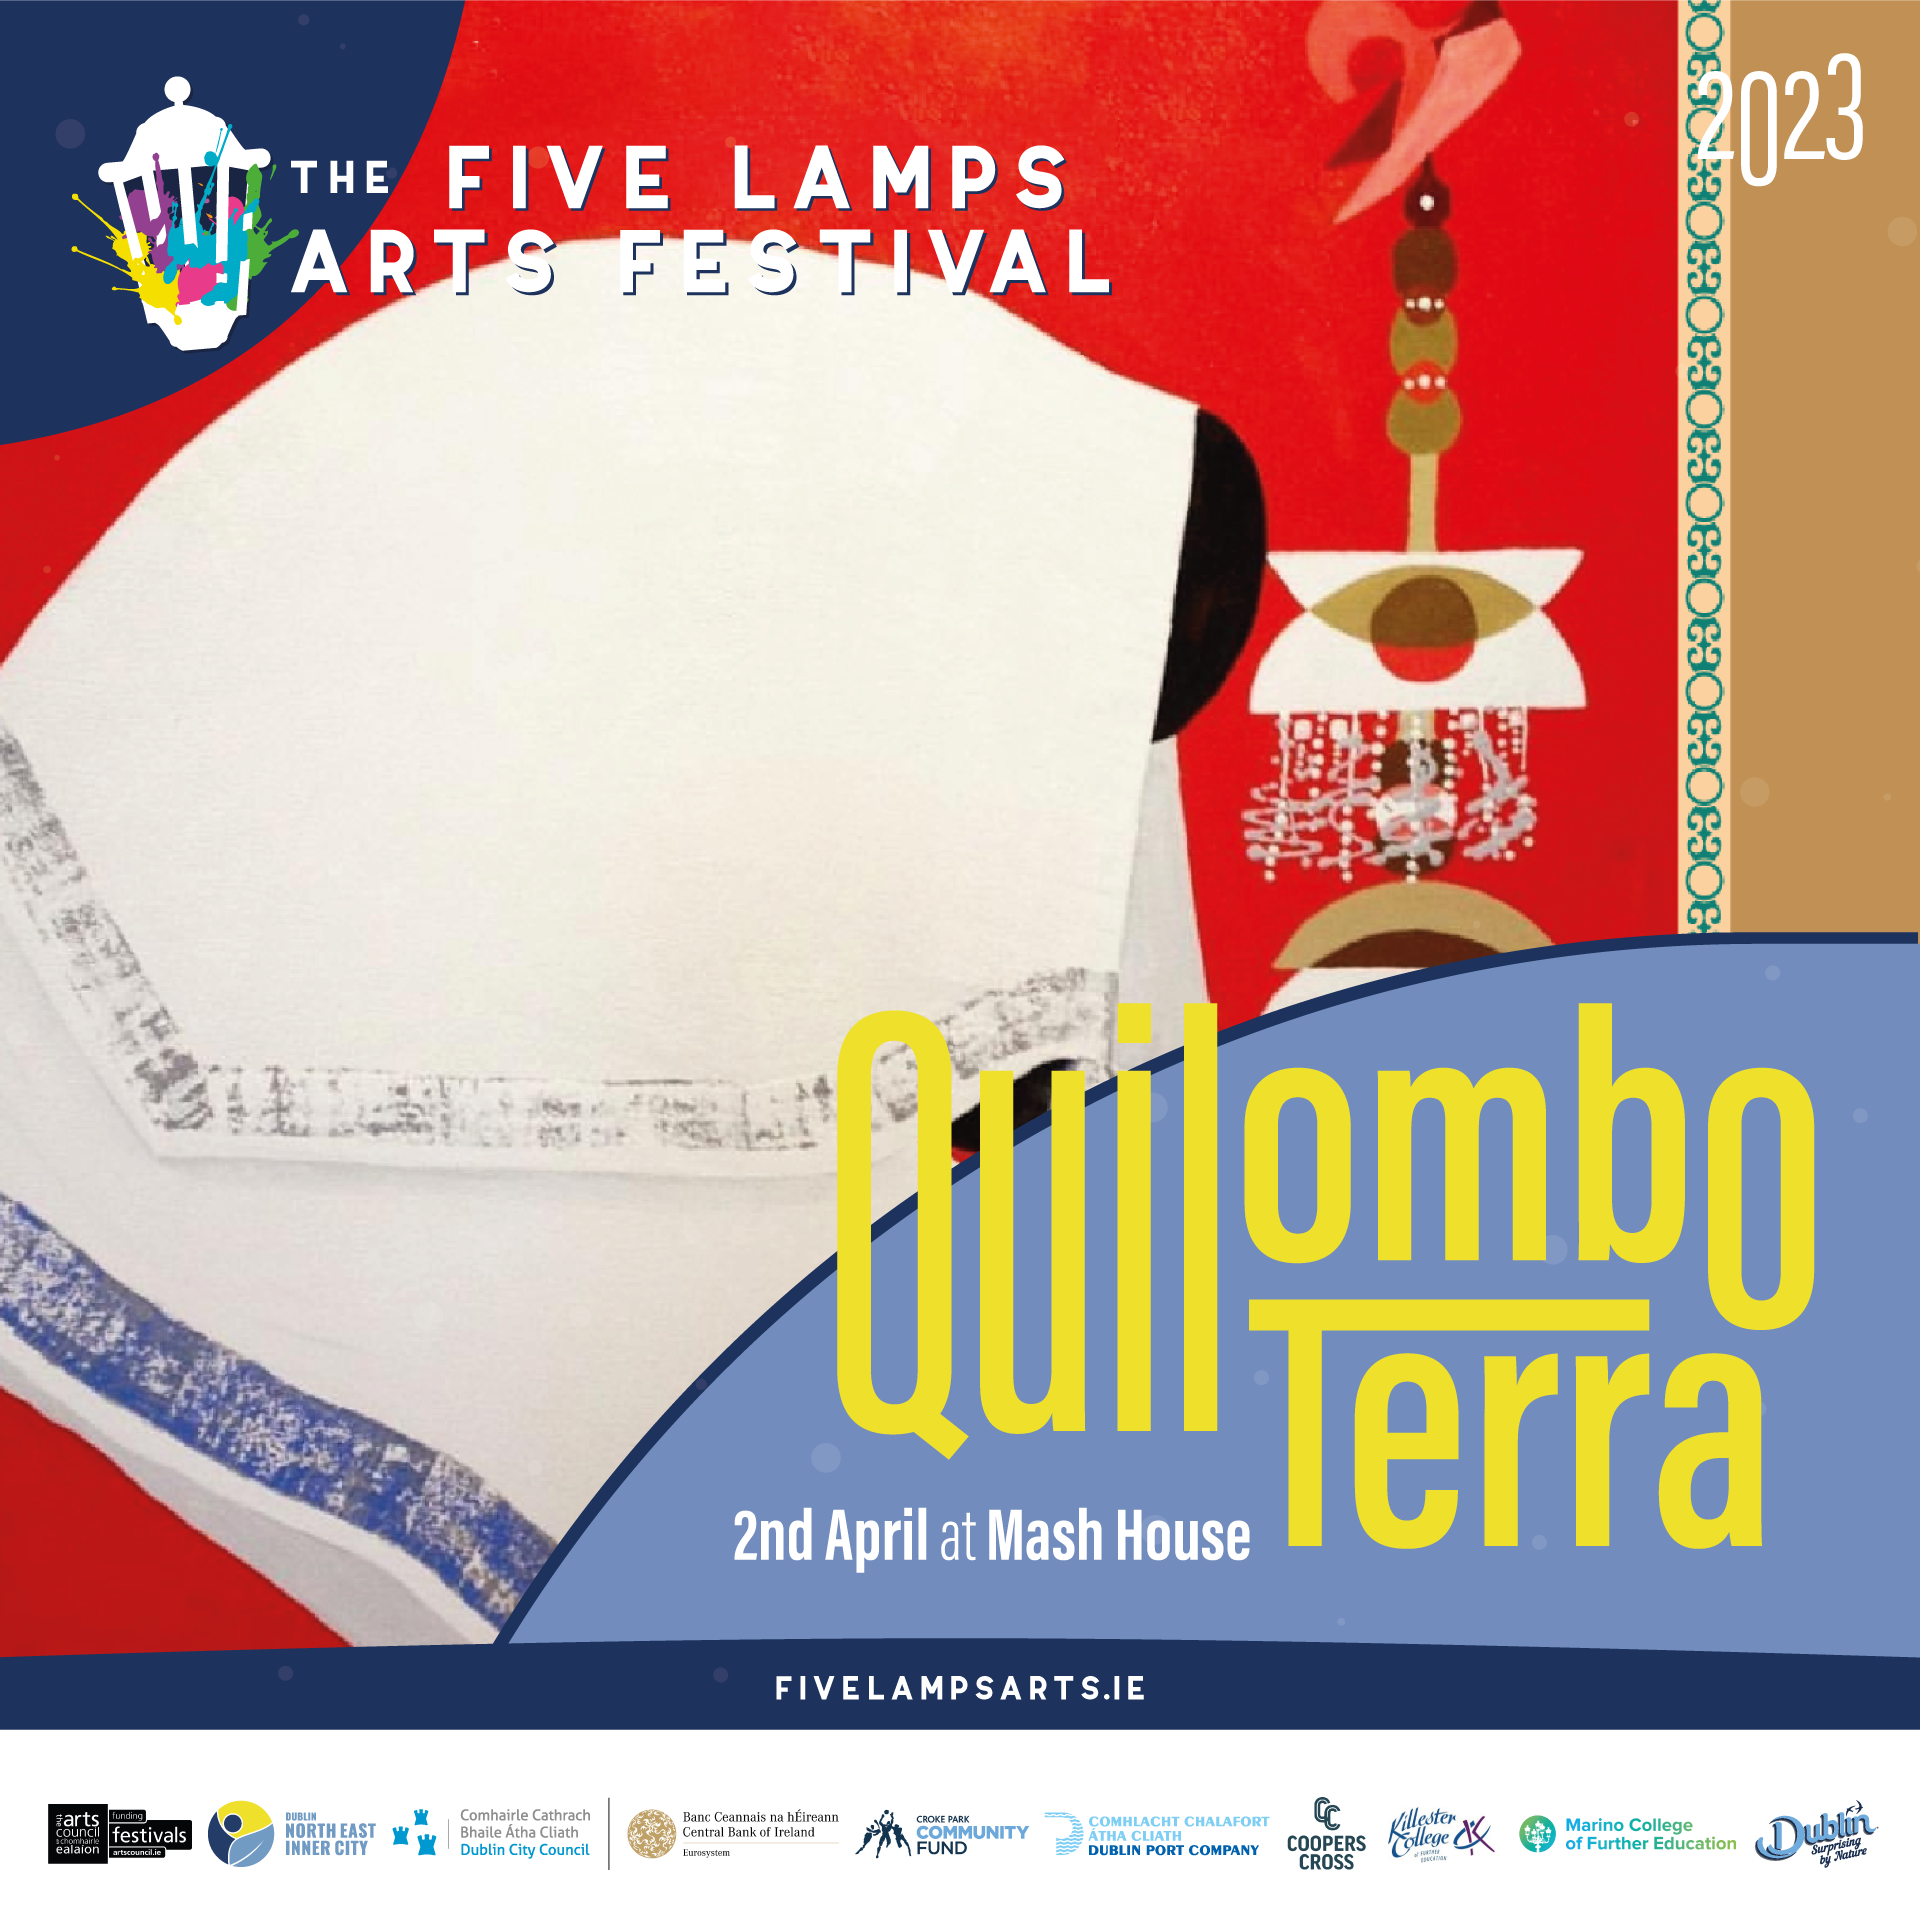 Quilombo Terra is an immersive afternoon of Afrocentric dances, music, and discussions on decolonisation part of Five Lamps Arts Festival